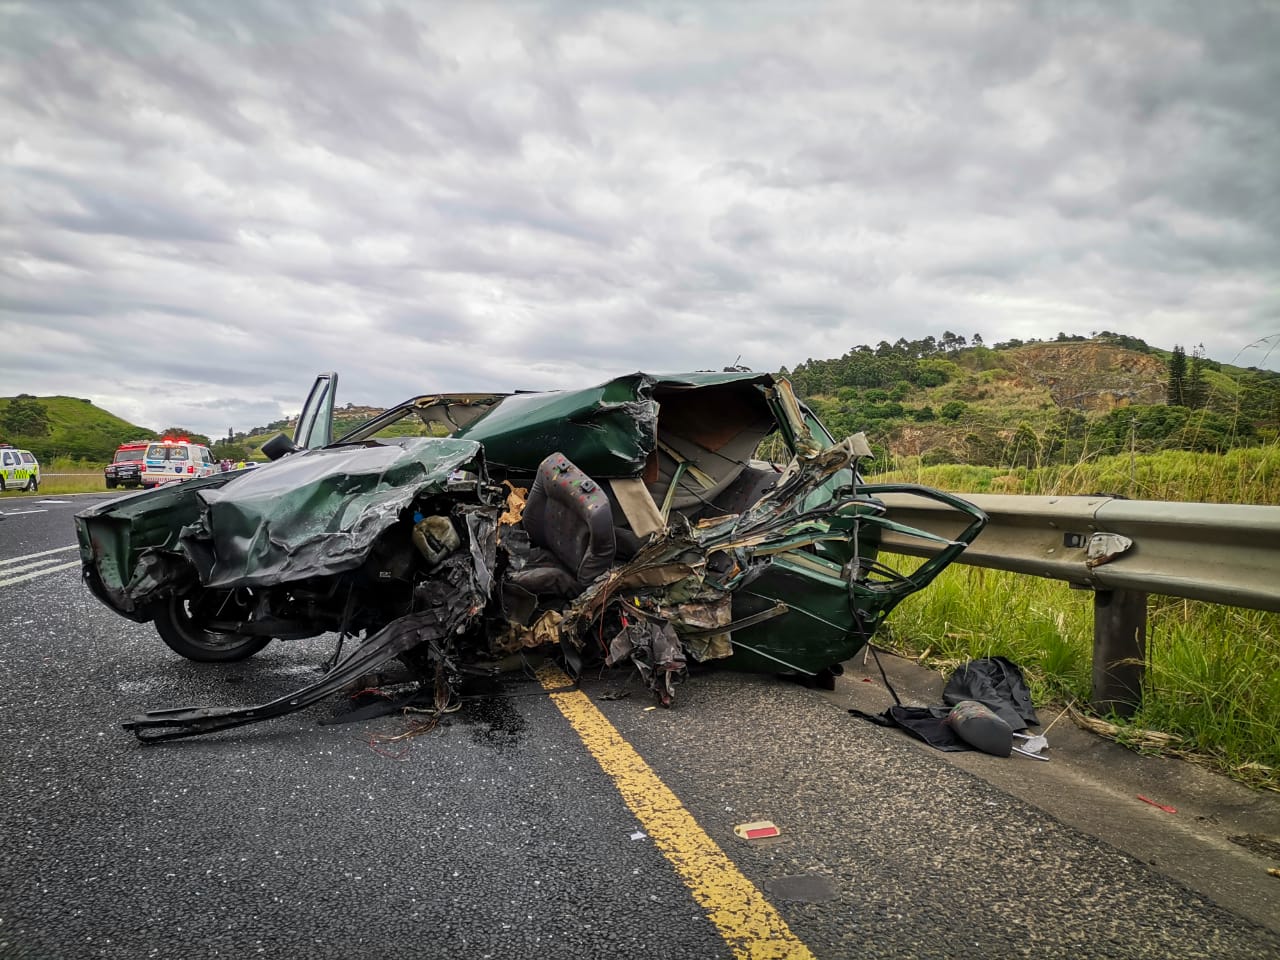 People perished in horrific accident